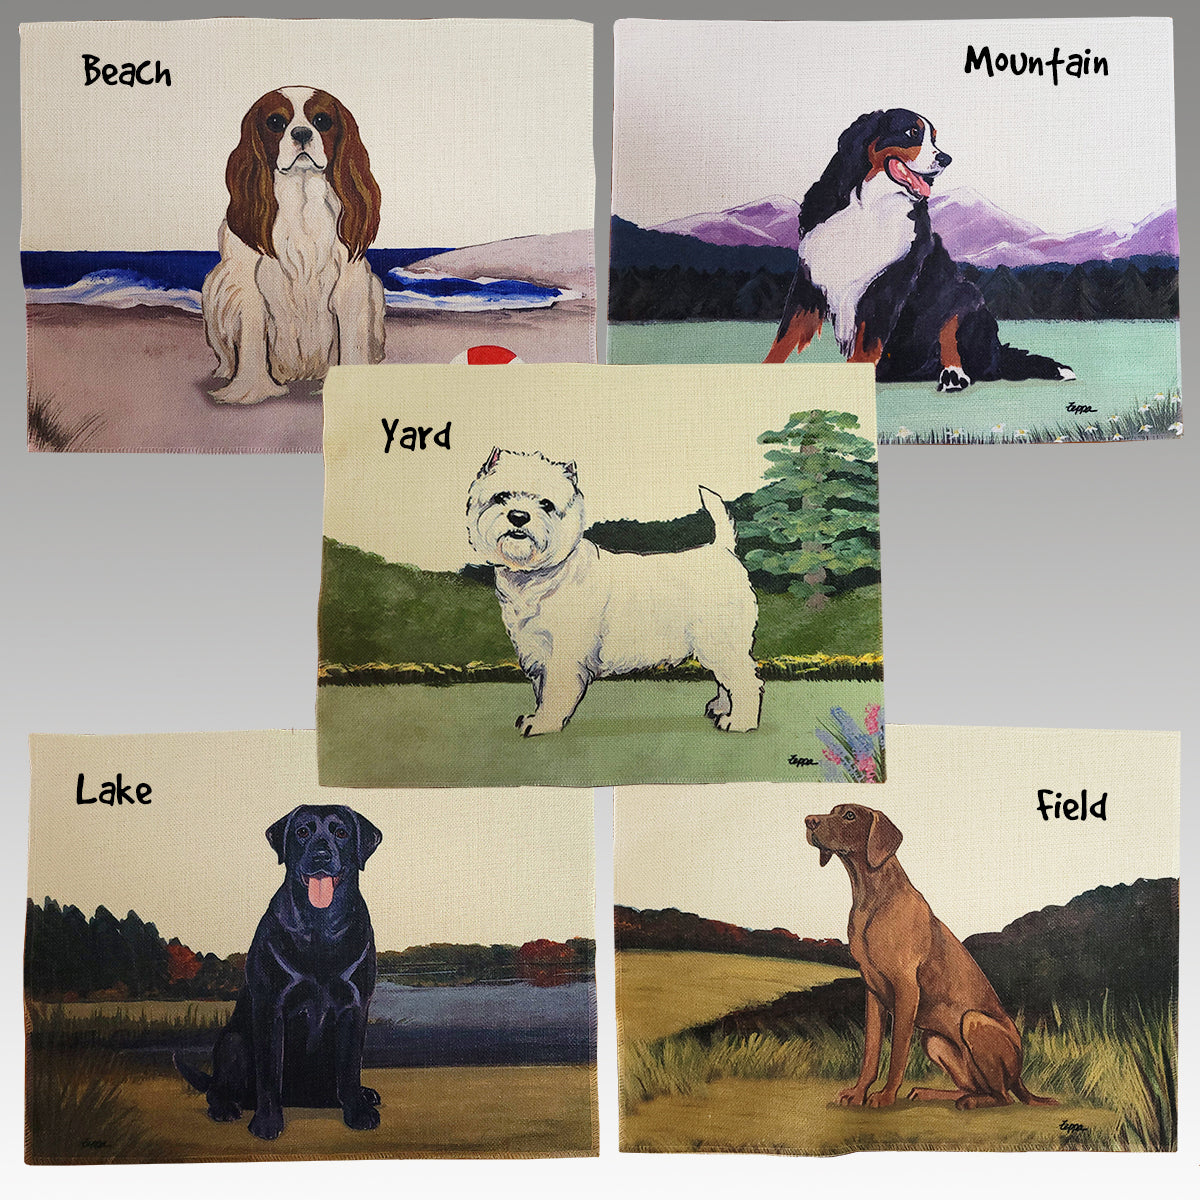 Greater Swiss Mountain Dog Scenic Placemats